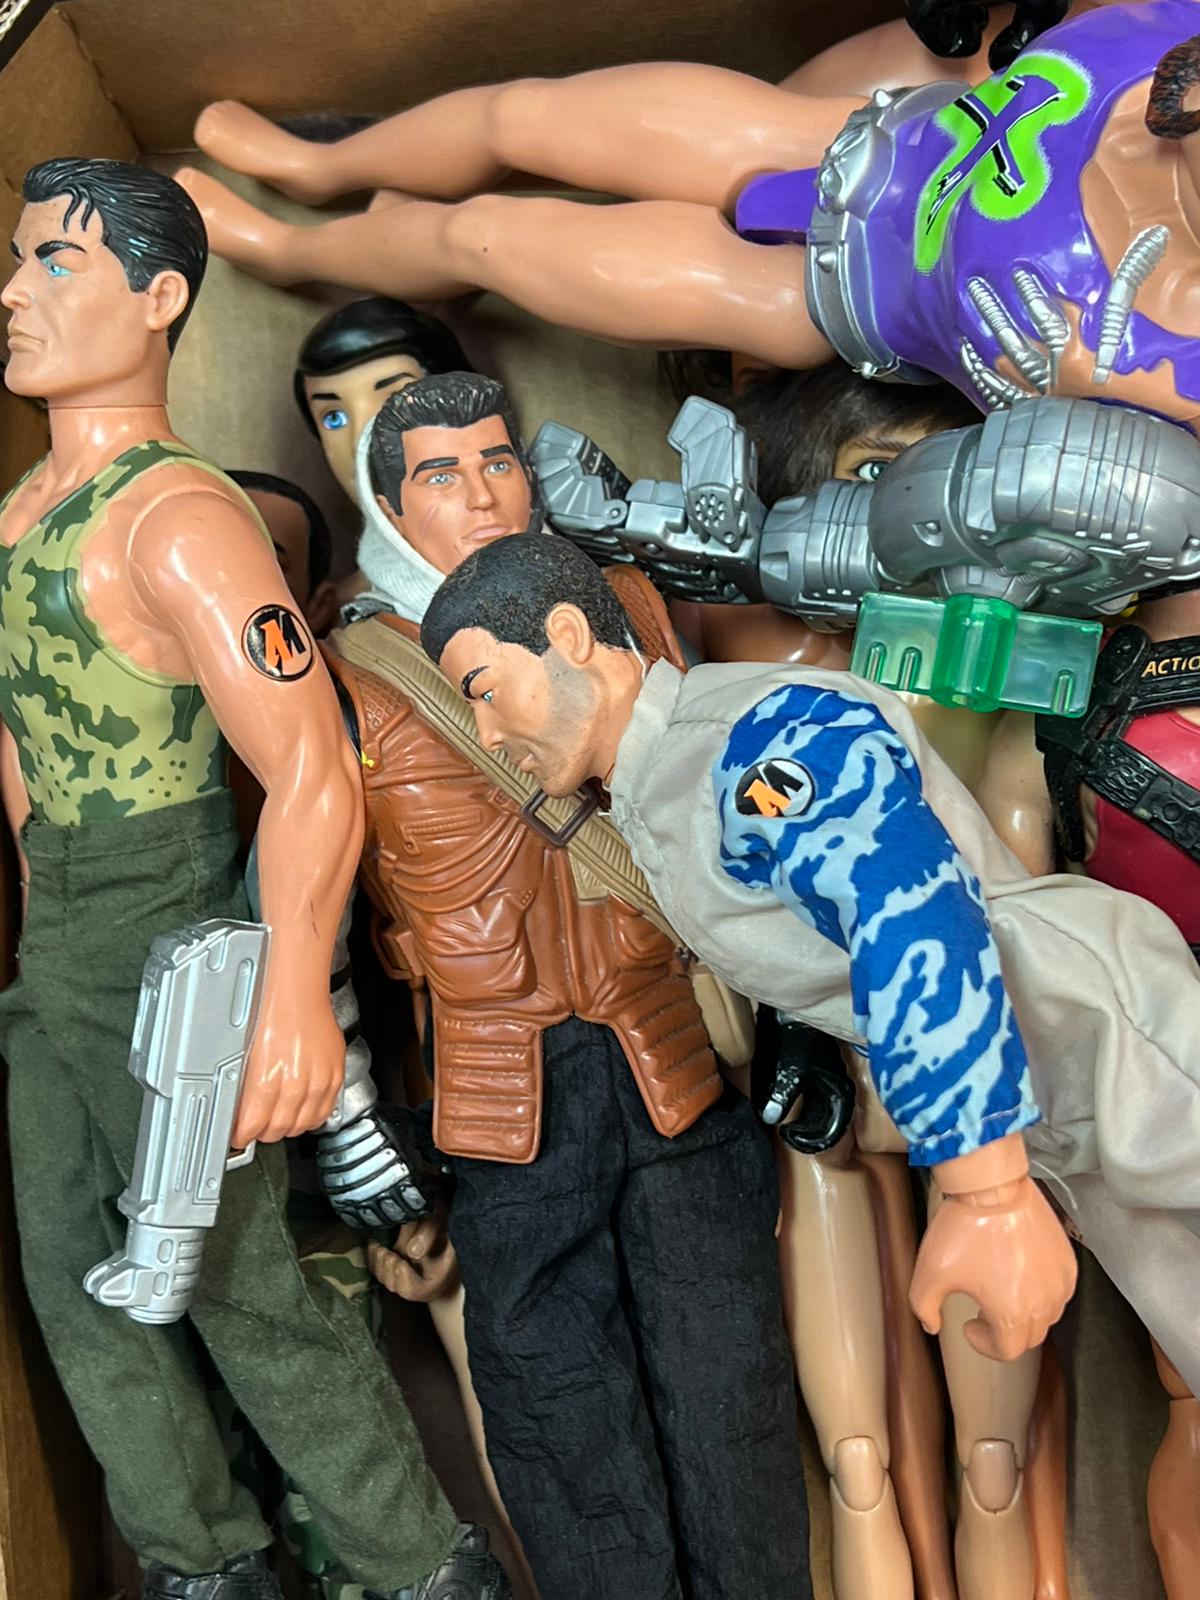 LARGE COLLECTION OF ACTION MAN ACTION FIGURES & ACCESSORIES - Image 5 of 6